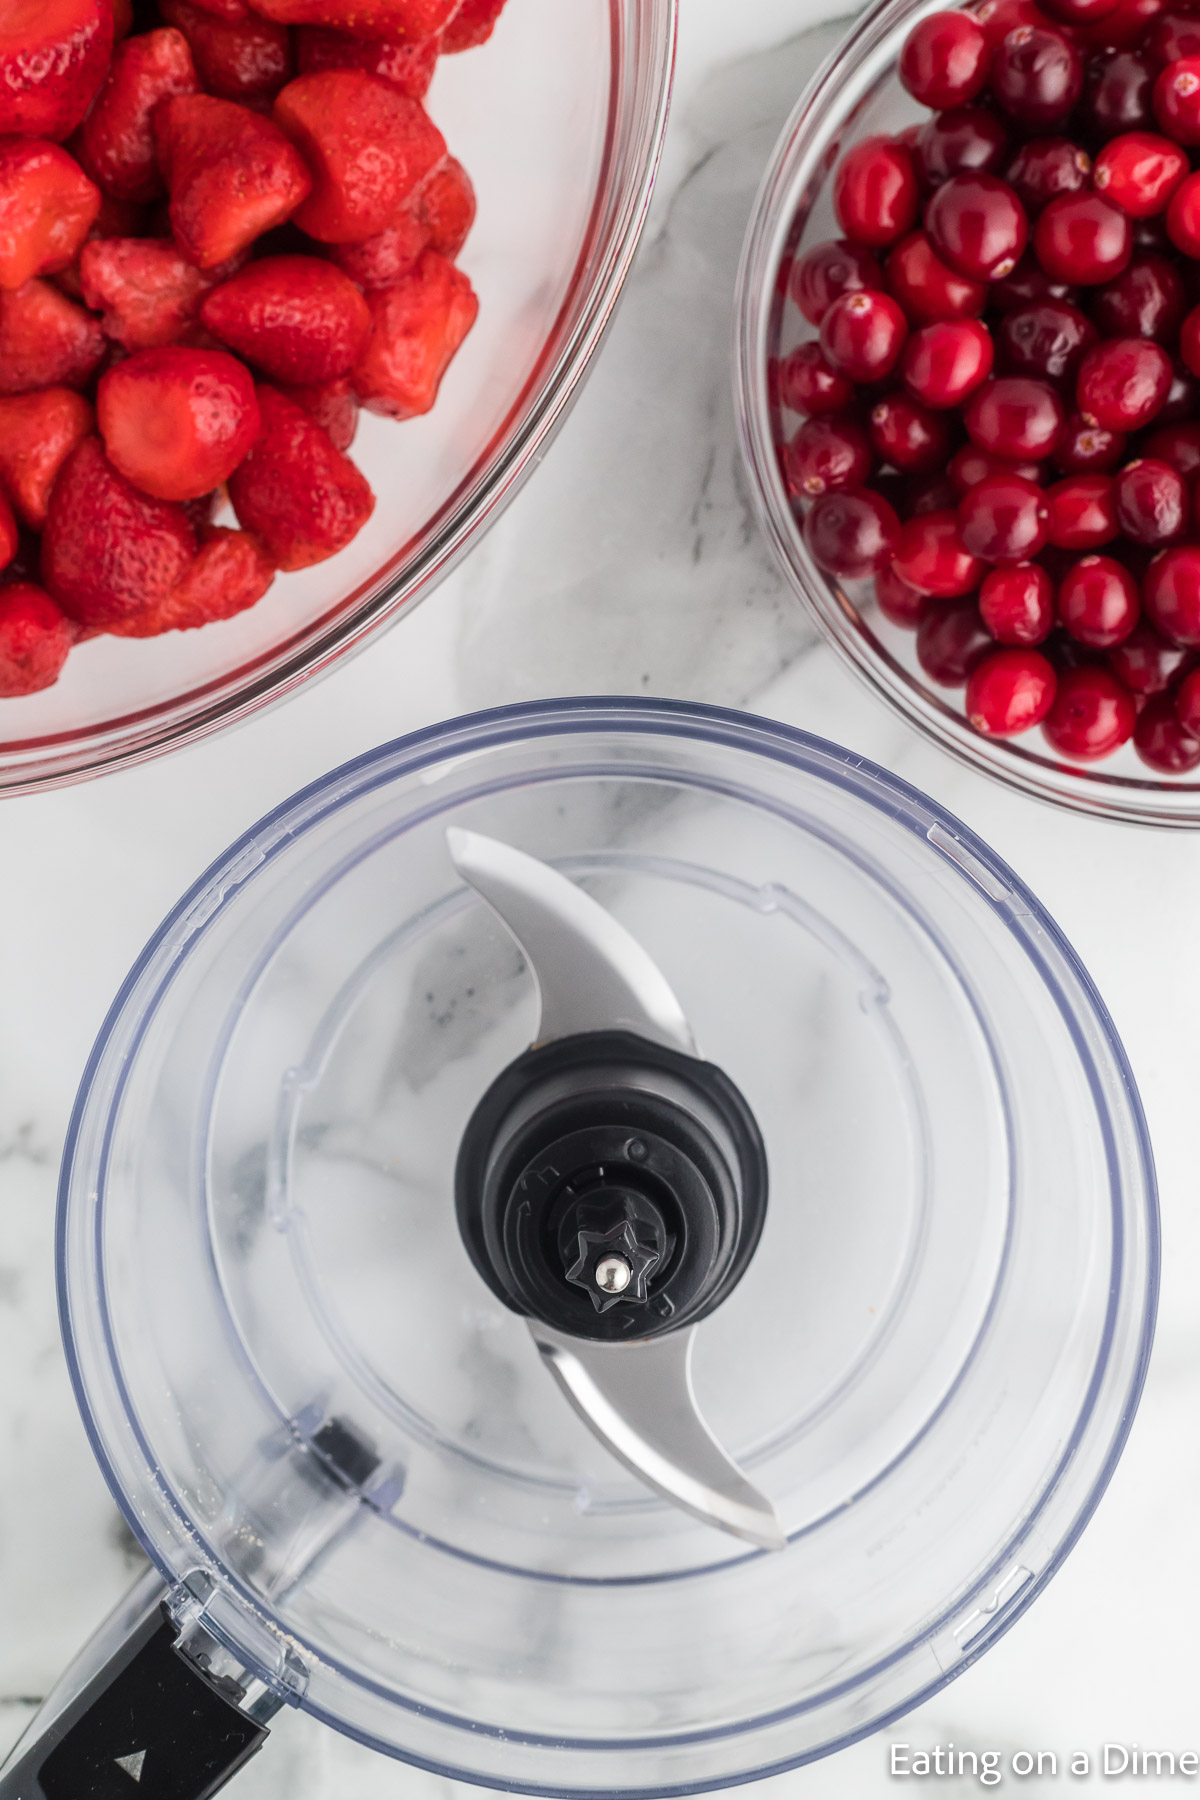 Food processor with bowls of cranberries and strawberries